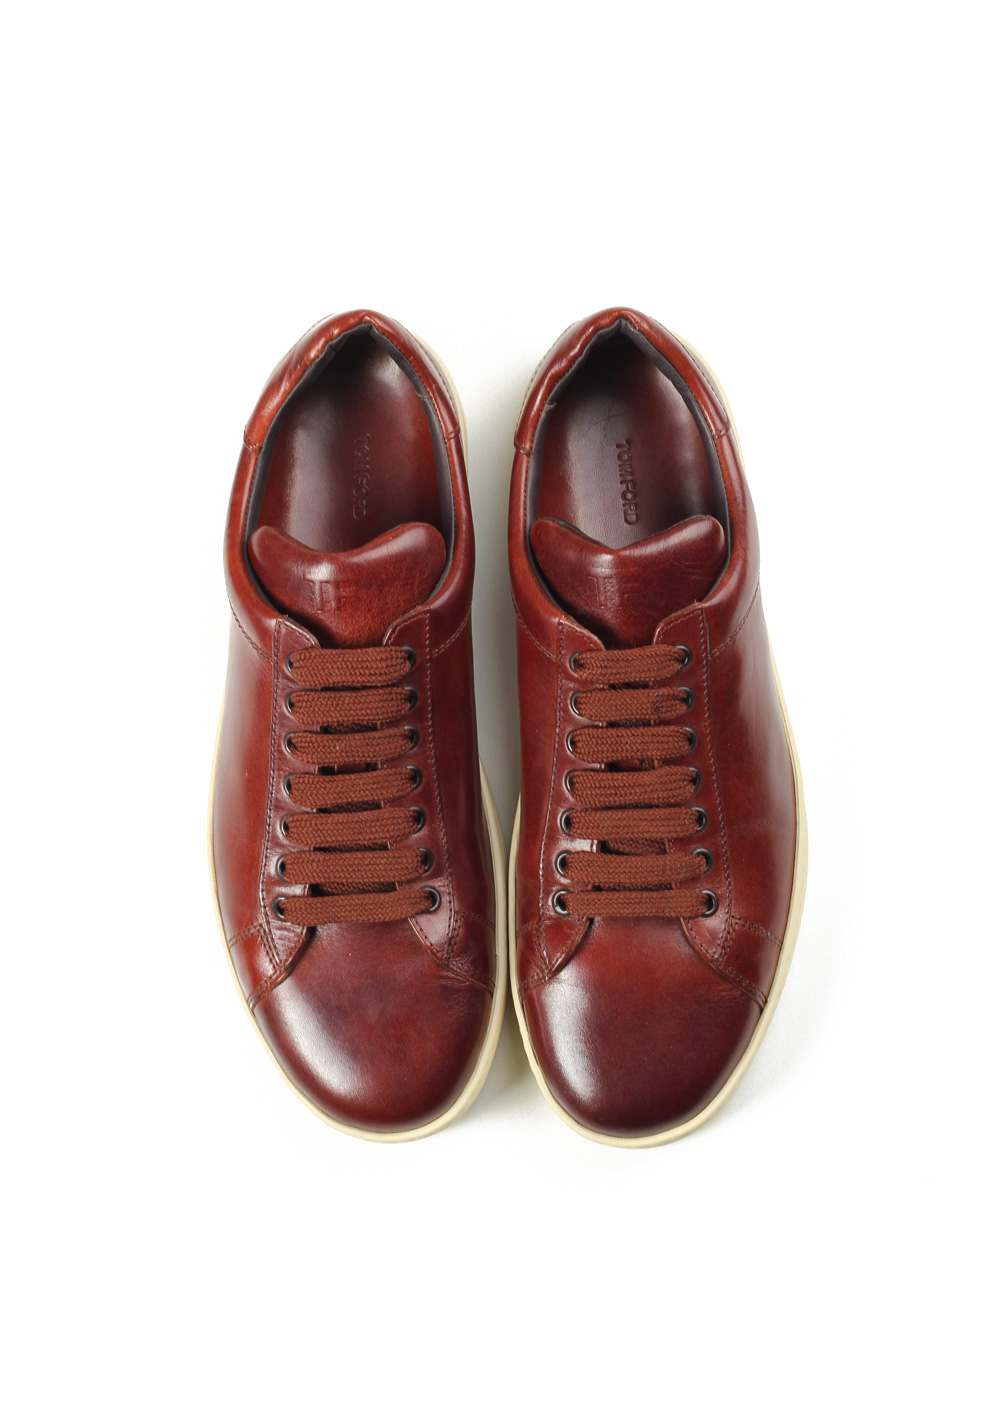 TOM FORD Russel Low Top Brown Leather Sneaker Shoes Size 8.5 Uk / 9.5 U.S. | Costume Limité